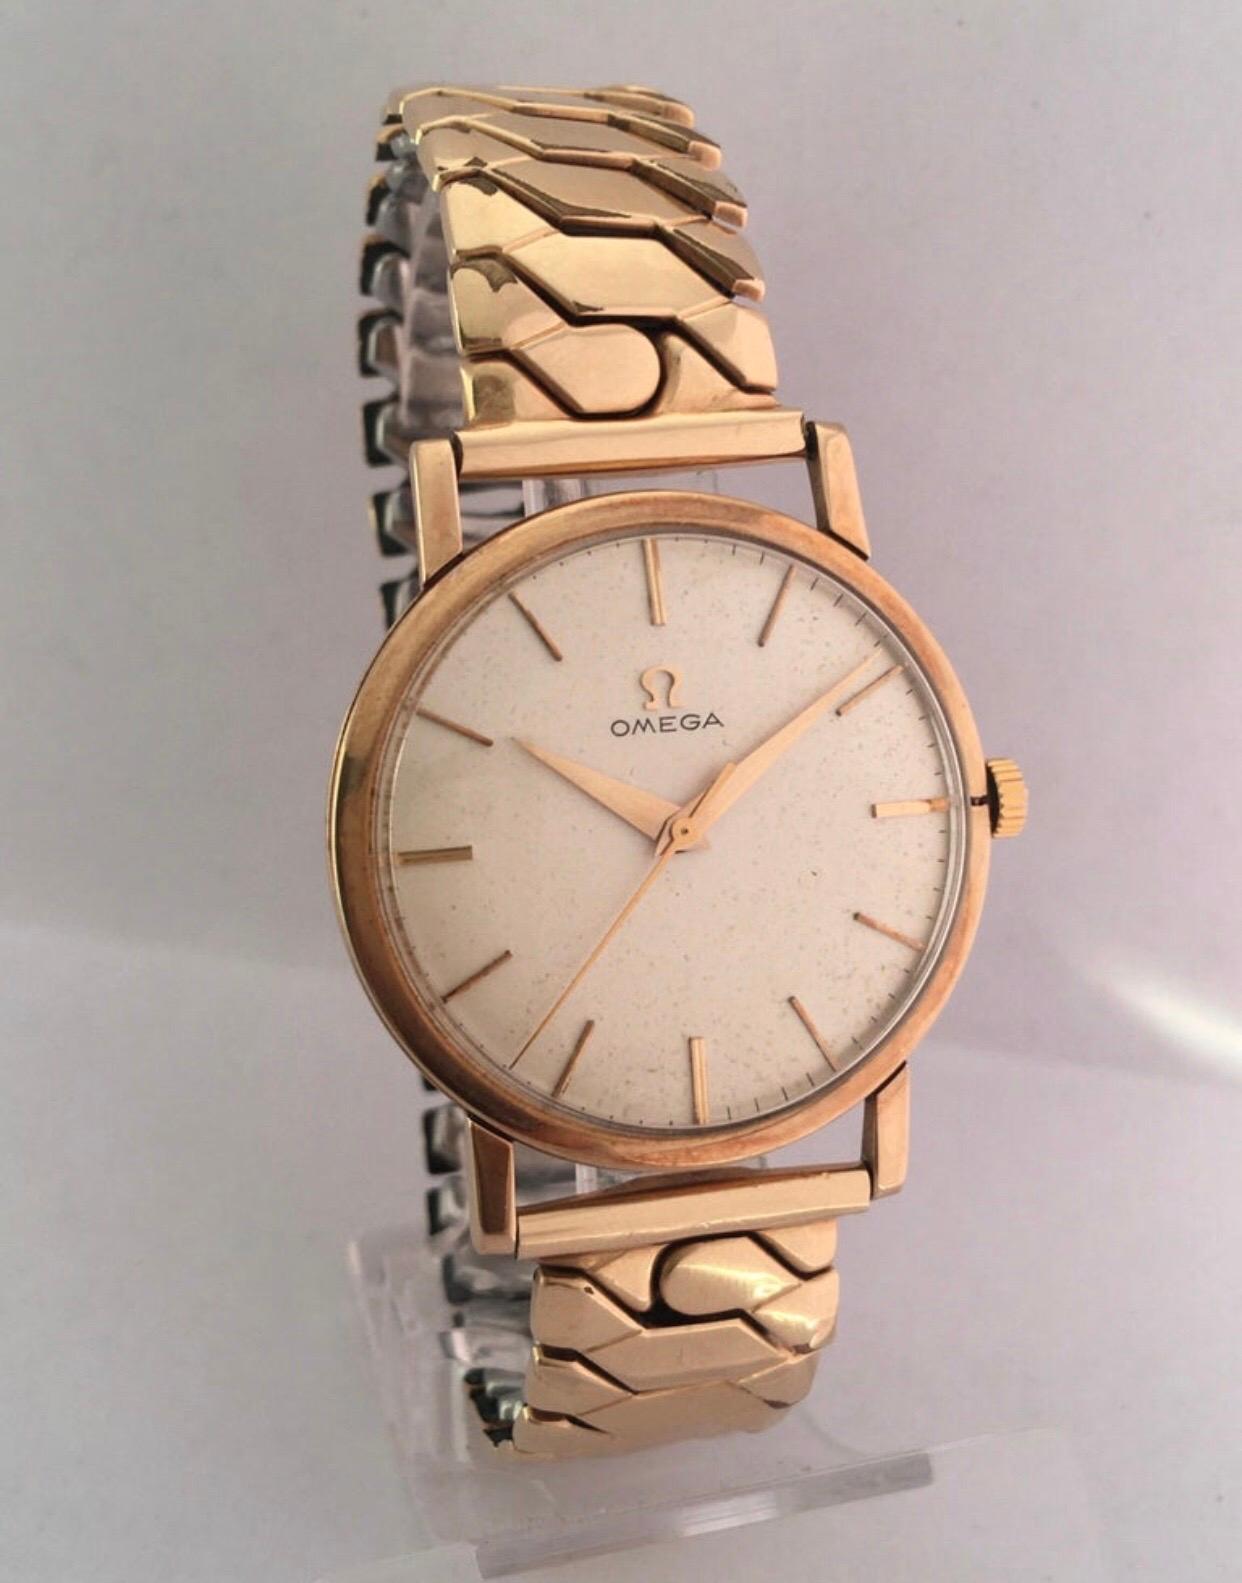 9 Karat Gold and Rolled Gold Bracelet 1960s Omega Mechanical Watch In Good Condition For Sale In Carlisle, GB